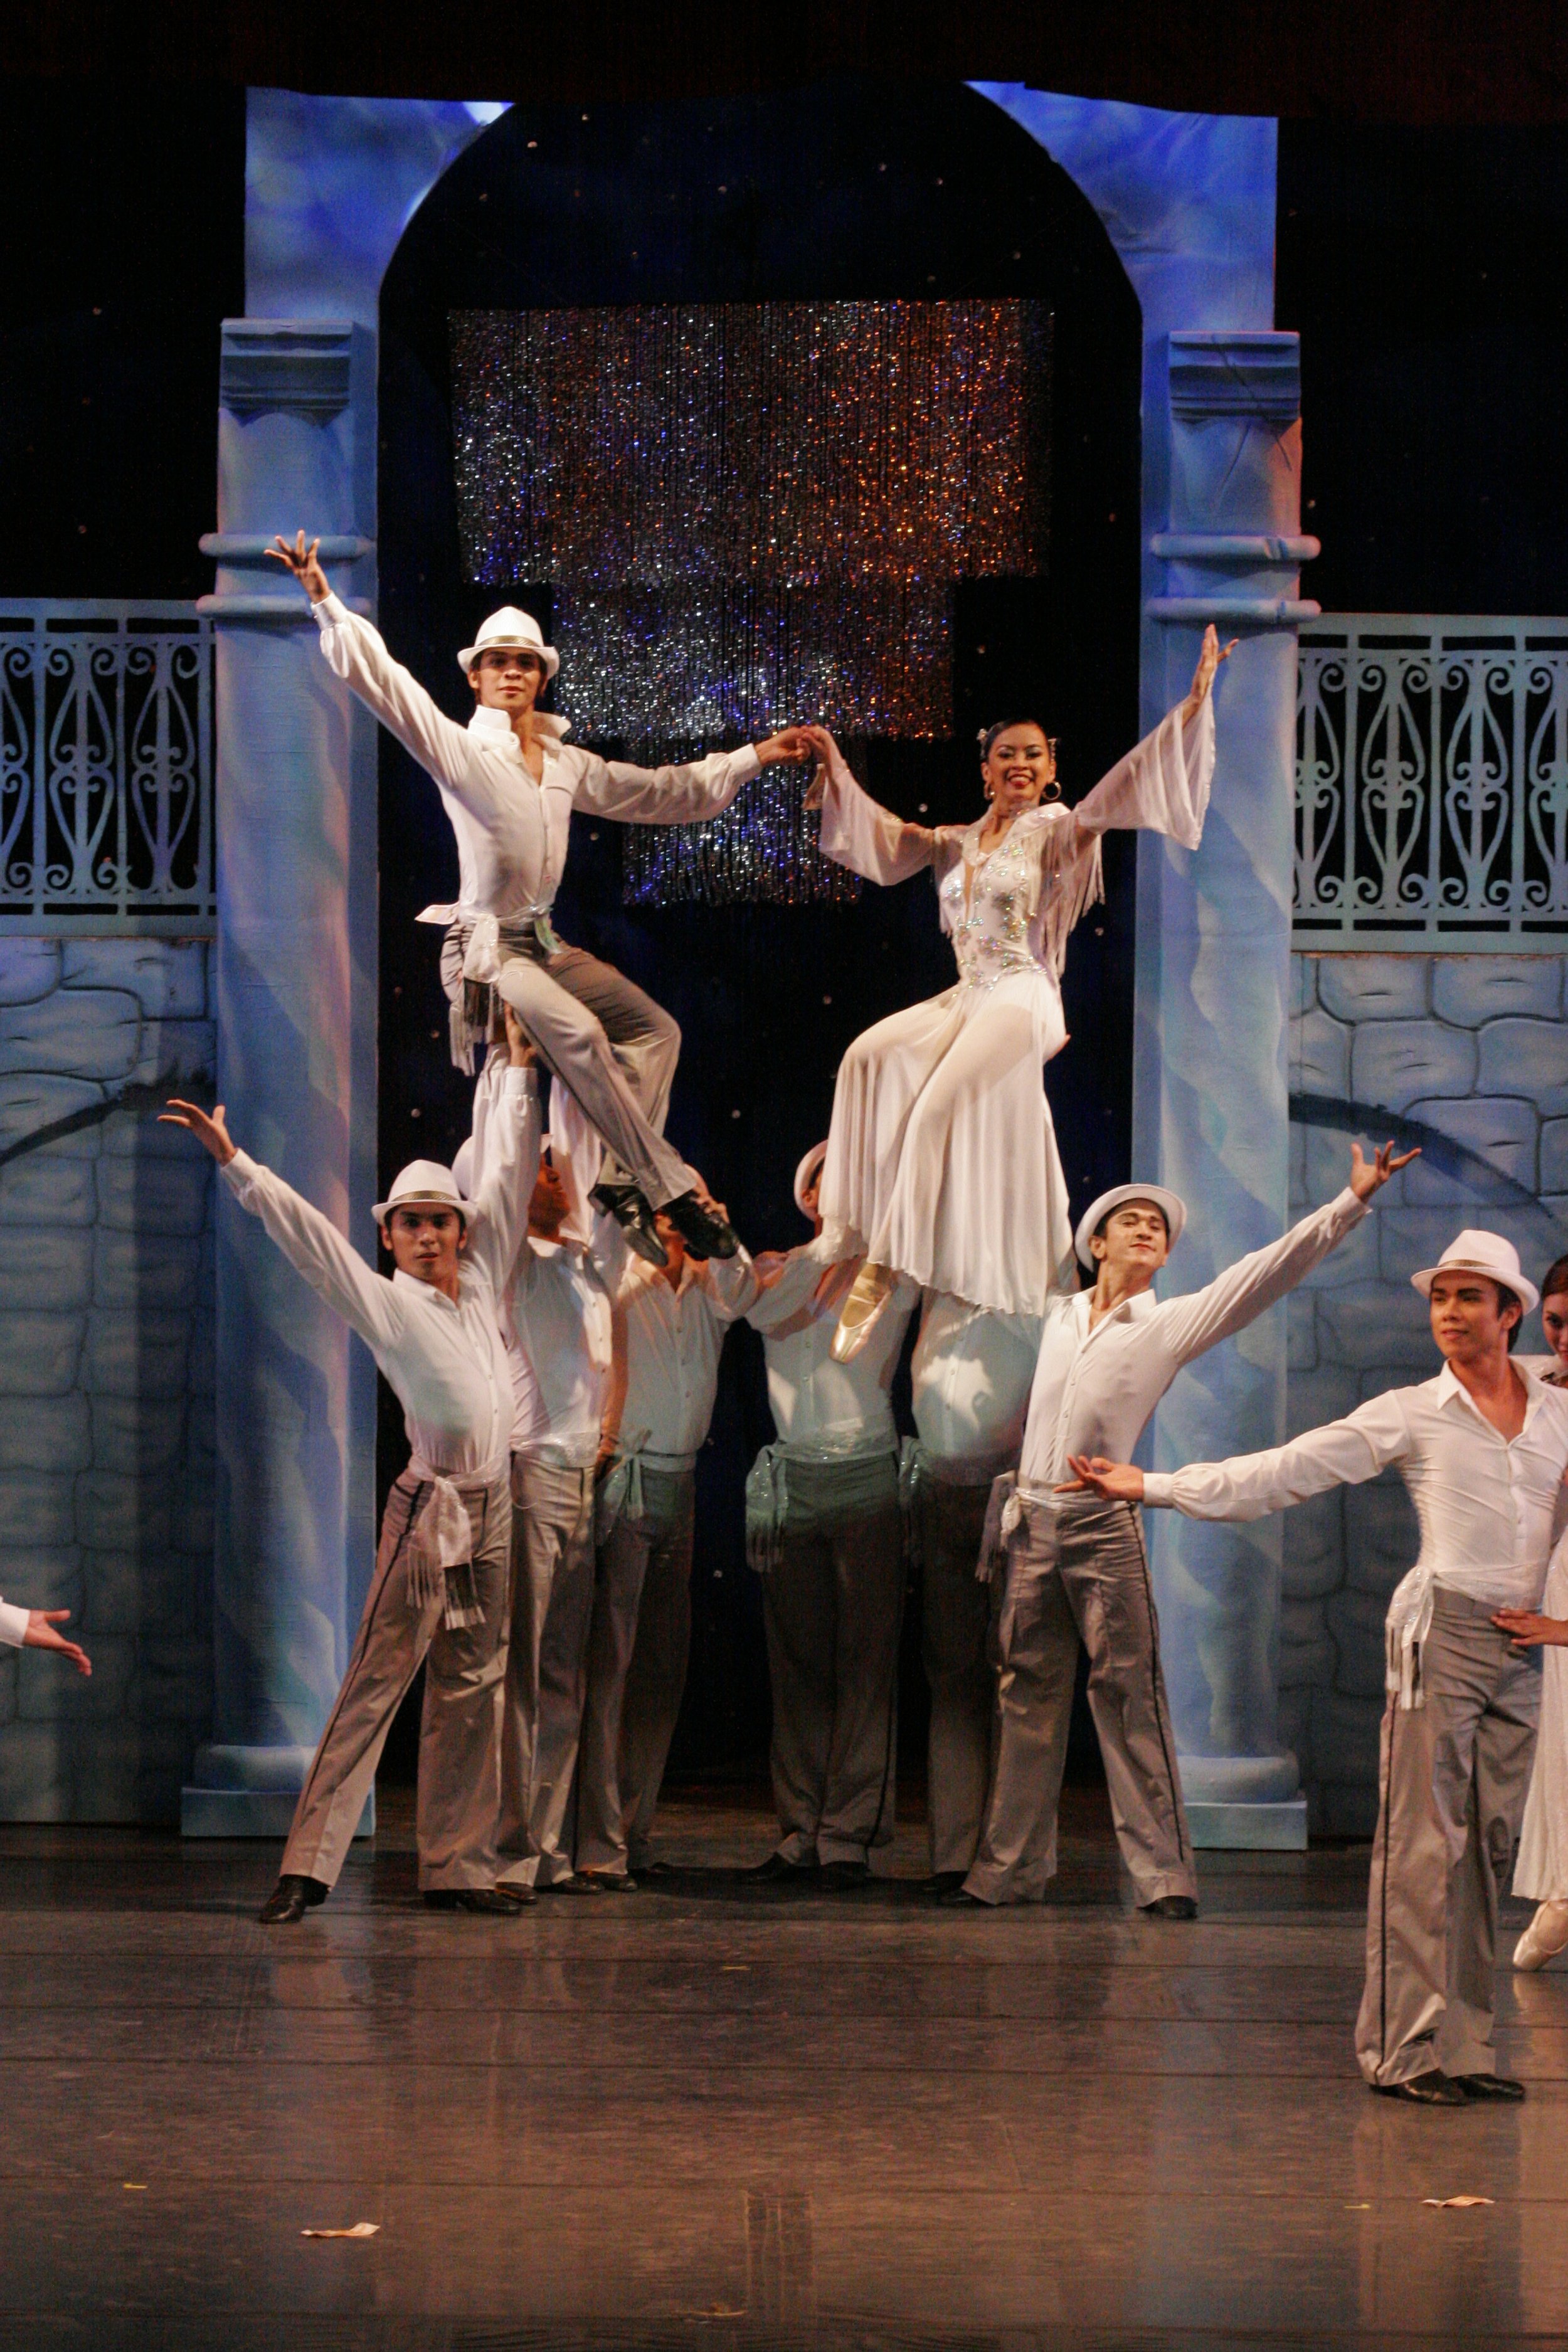    The gray-and-white color combination worn by the groom (Gerardo Francisco Jr.) is echoed in the outfits of the male entourage as they carry him and his bride (Sofia Sangco-Peralta) aloft in  Dulce . The rousing ballroom-to-ballet number was choreo